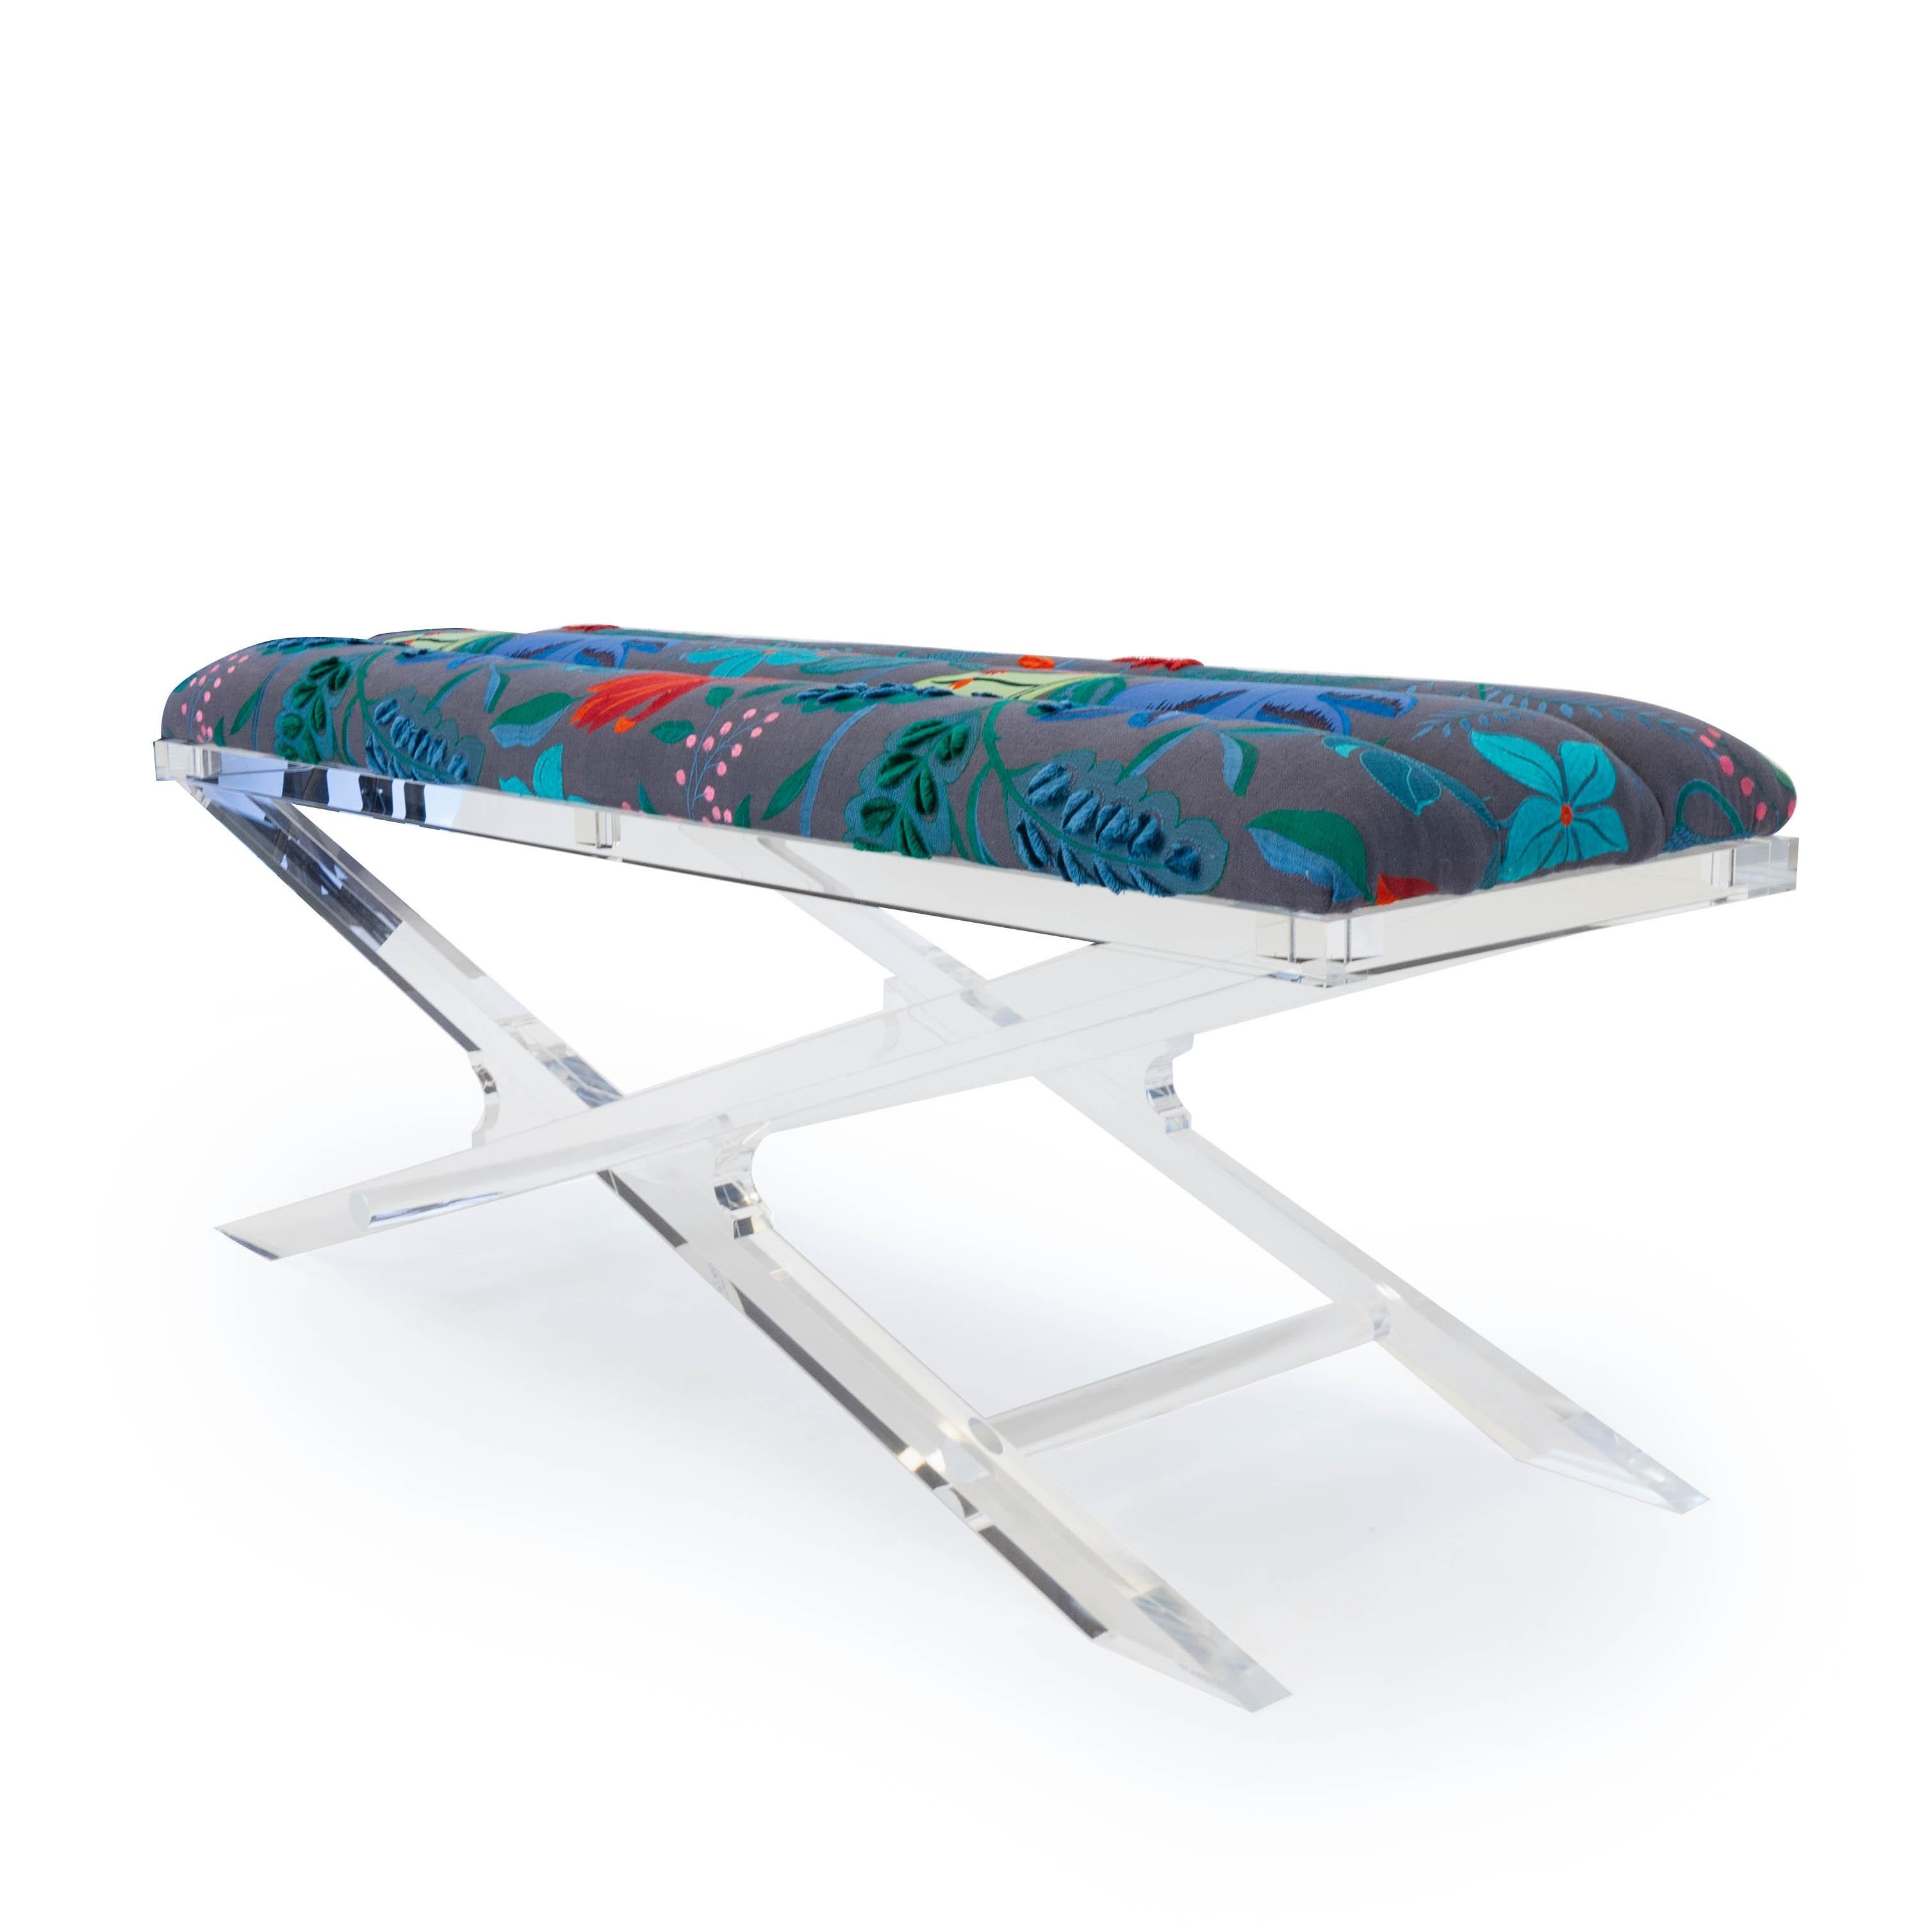 This modern bench features a clear Lucite base and an upholstered channeled cushion. The fabric is a colorful embroidered floral pattern from Jim Thompson fabrics. This piece can be sold as is our custom made with the customer’s choice of fabric.